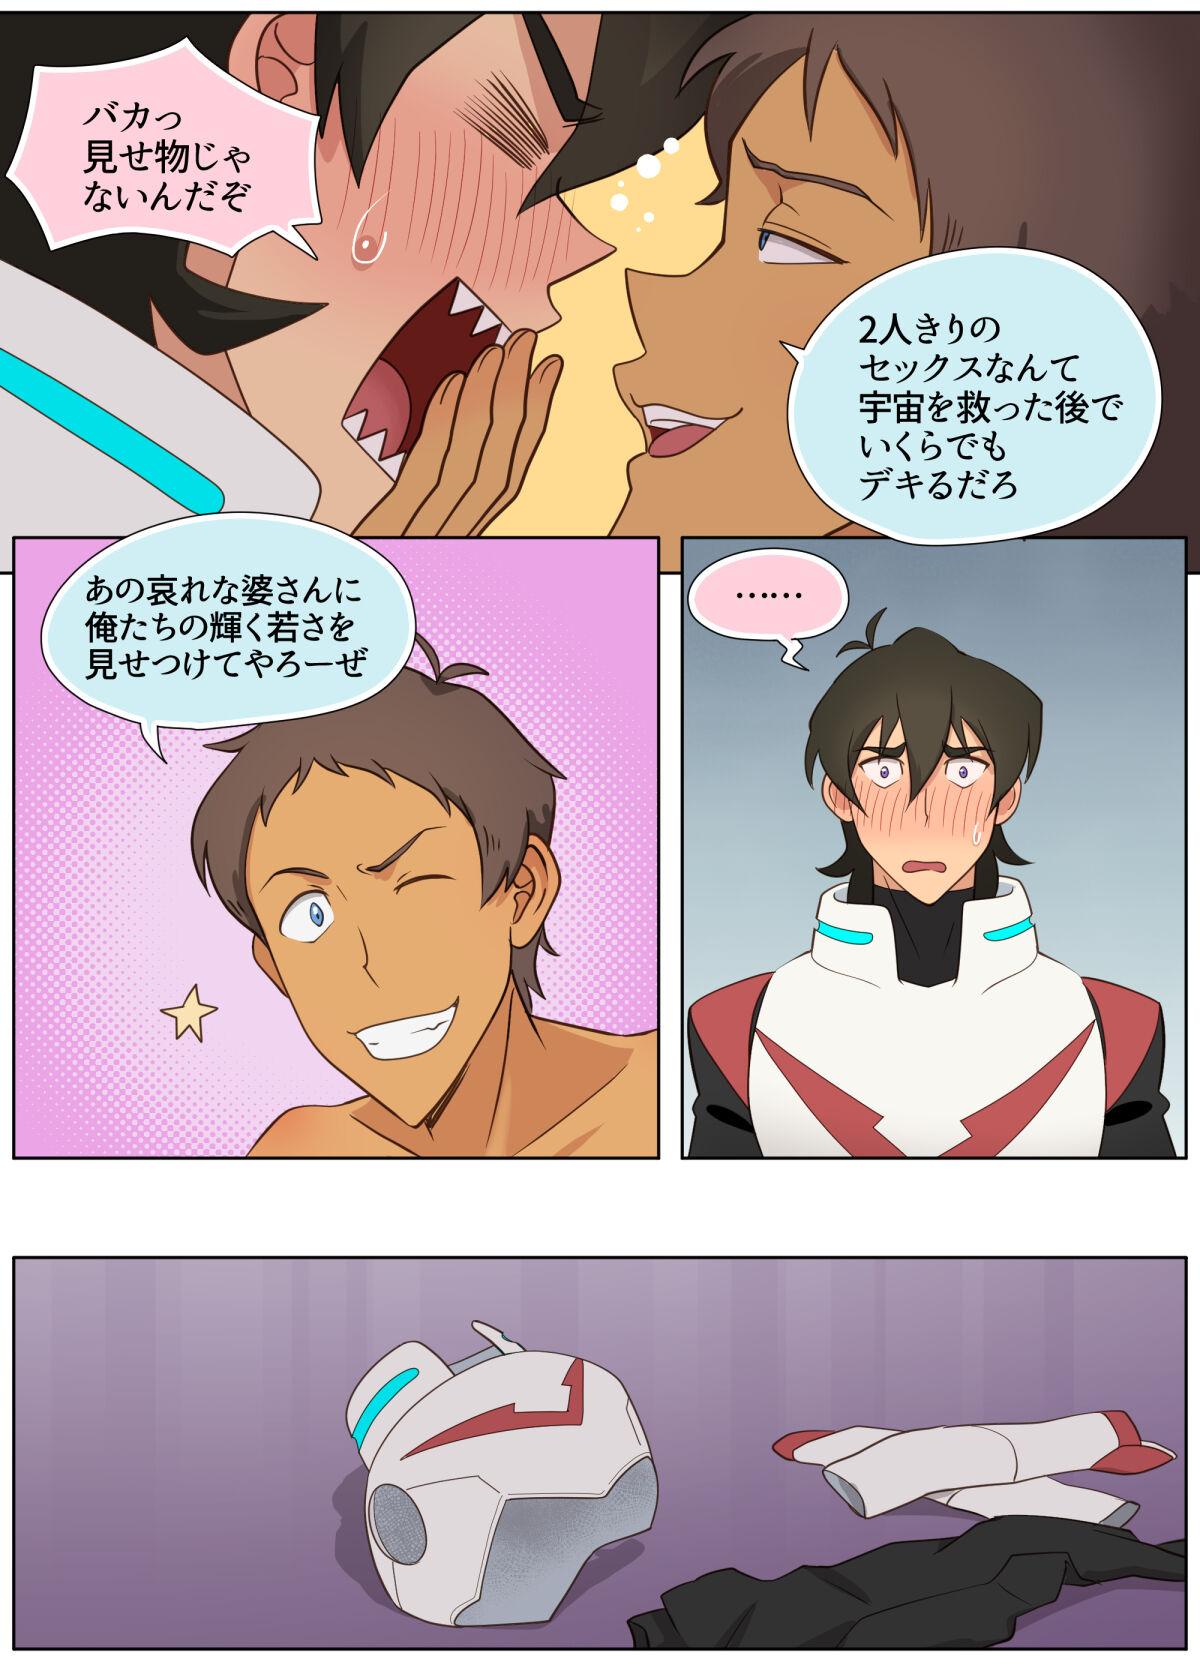 Tits ハガー様のおもちゃ! - Voltron Camgirl - Page 8